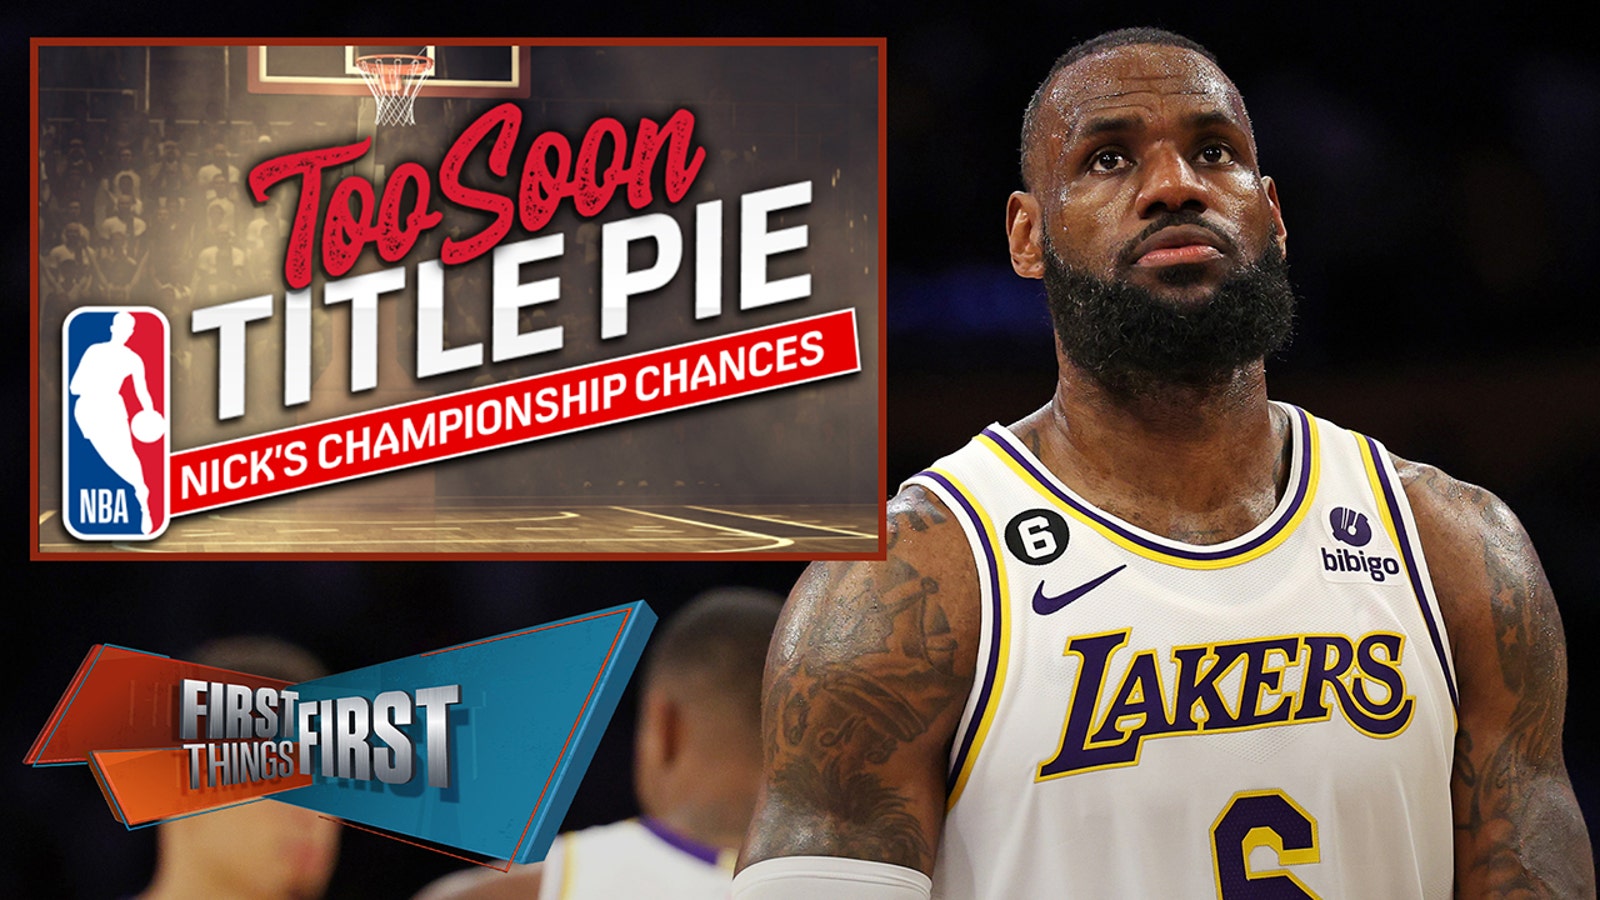 LeBron, Lakers challenge reigning champion Nuggets in Too Soon NBA Title Pie